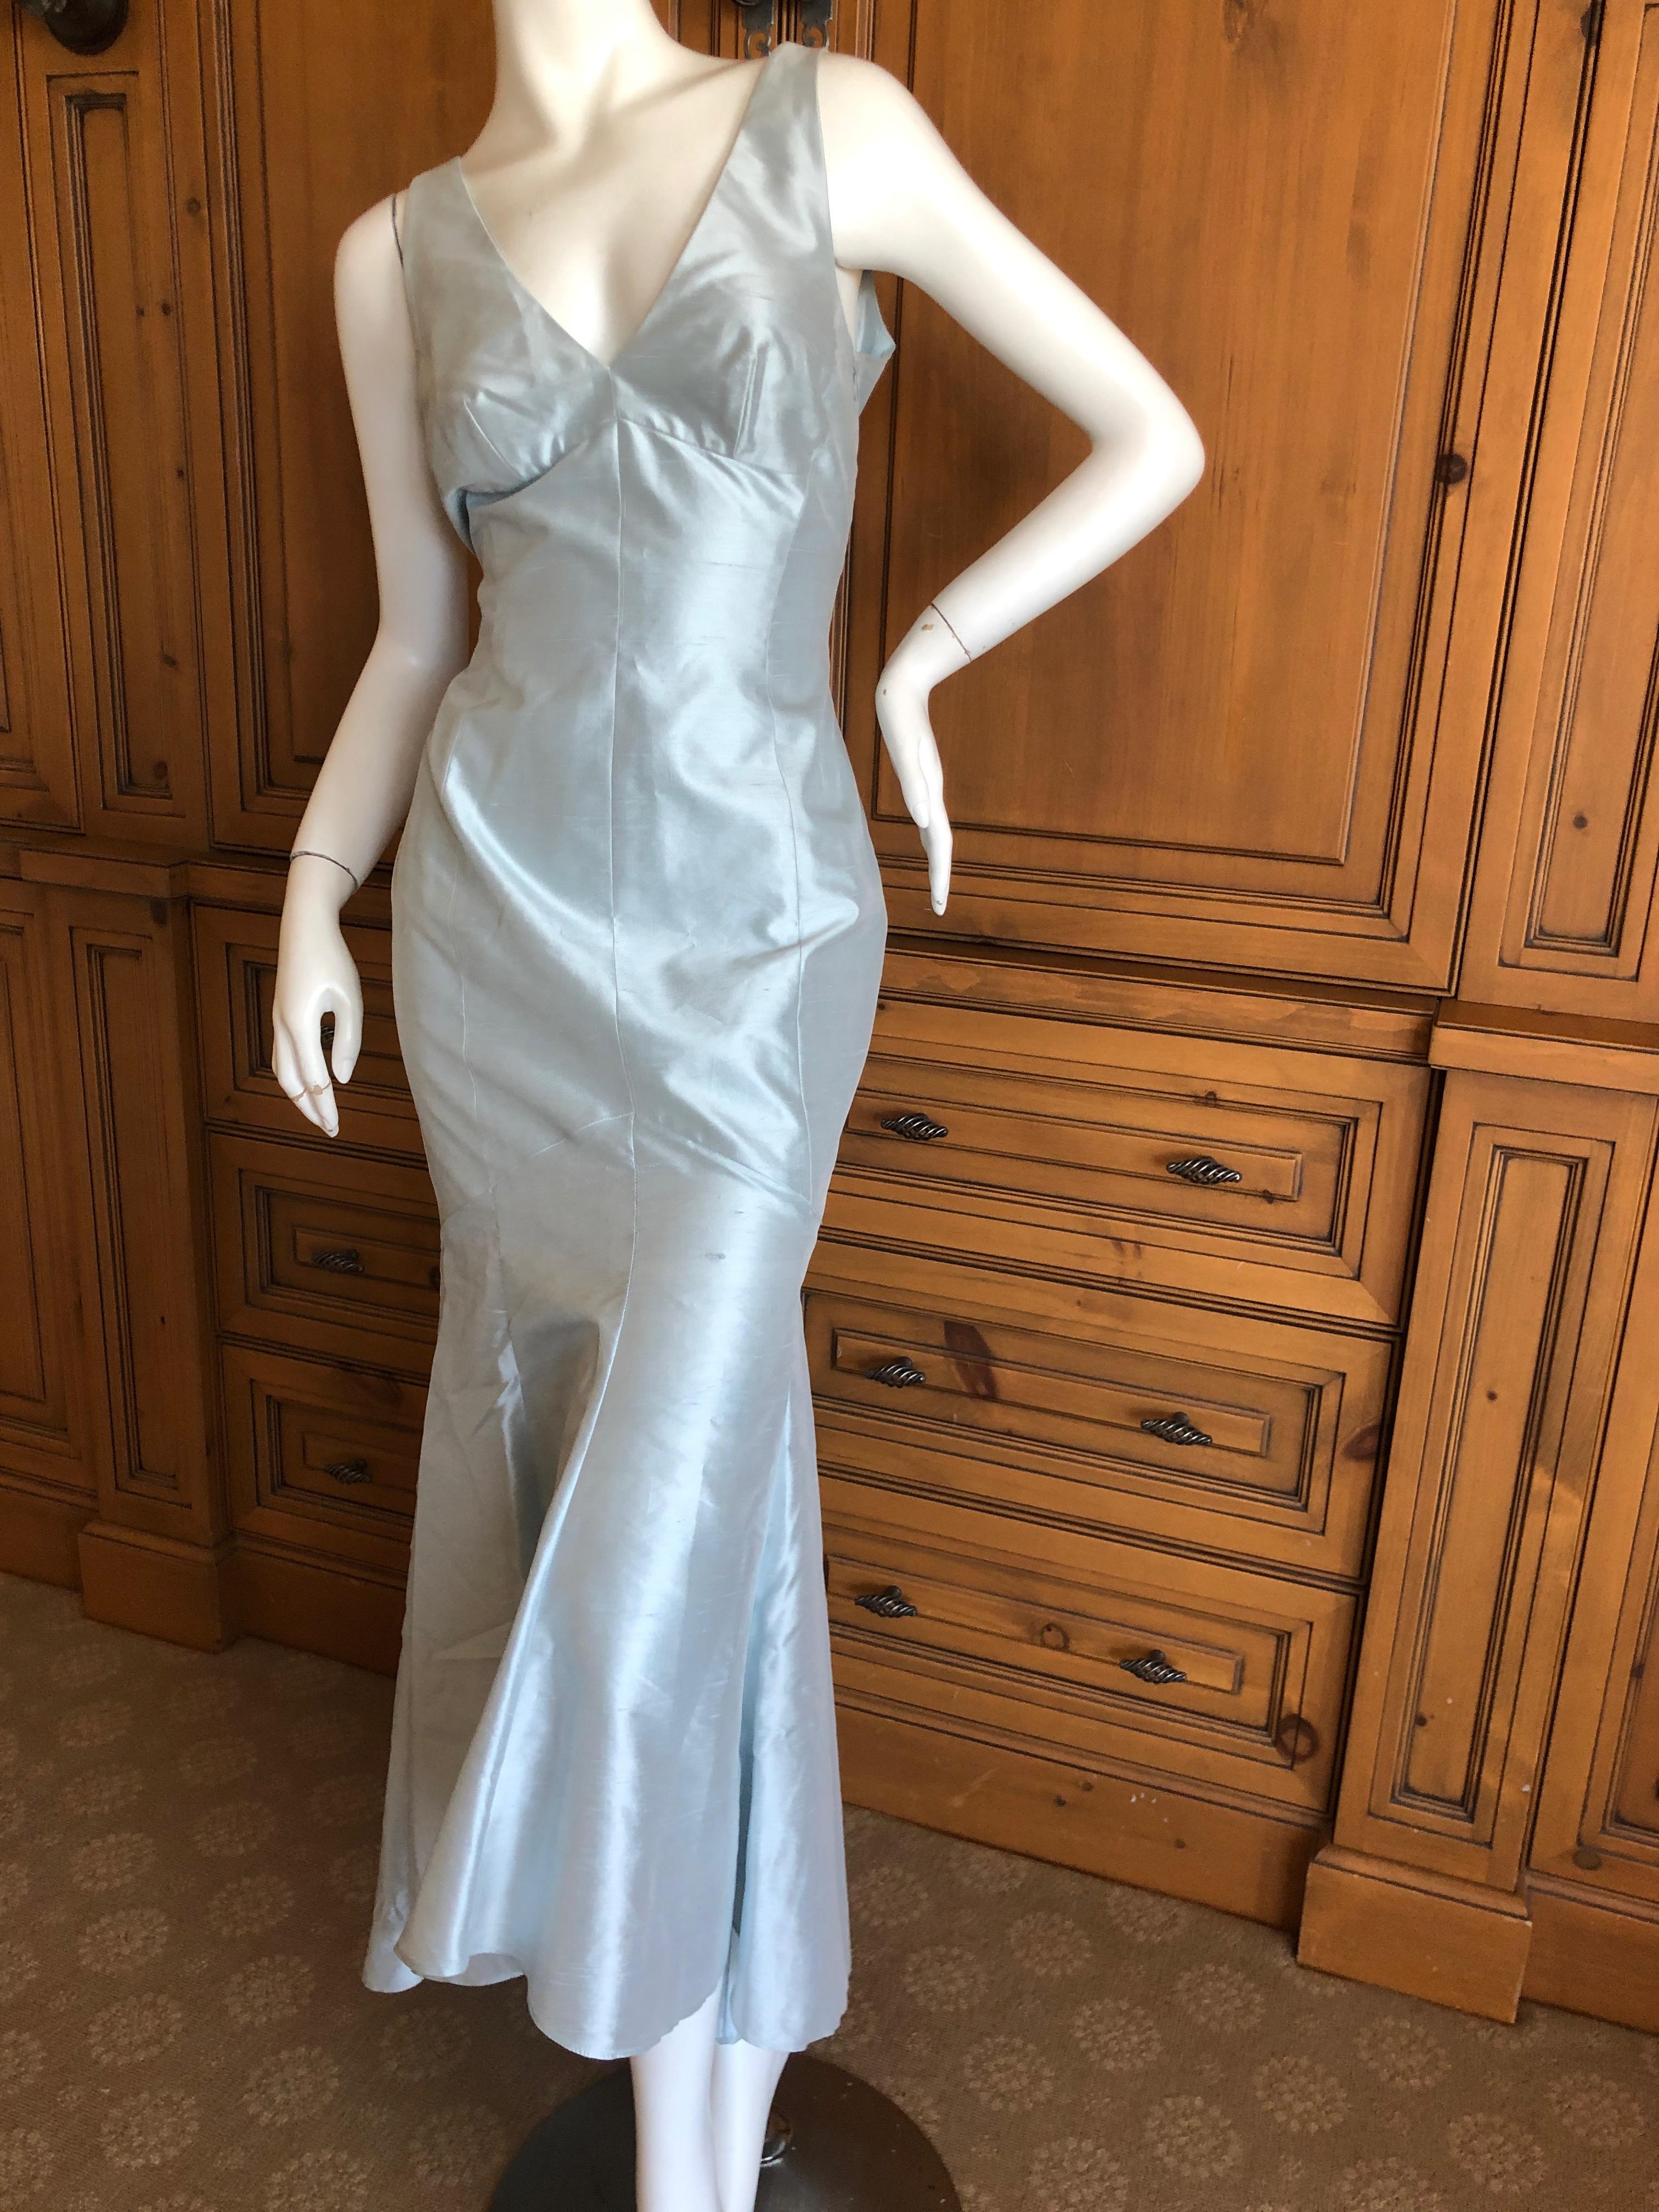 Thierry Mugler Couture Vintage 1980's Dupioni Silk Lace Up Evening Dress  In Excellent Condition For Sale In Cloverdale, CA